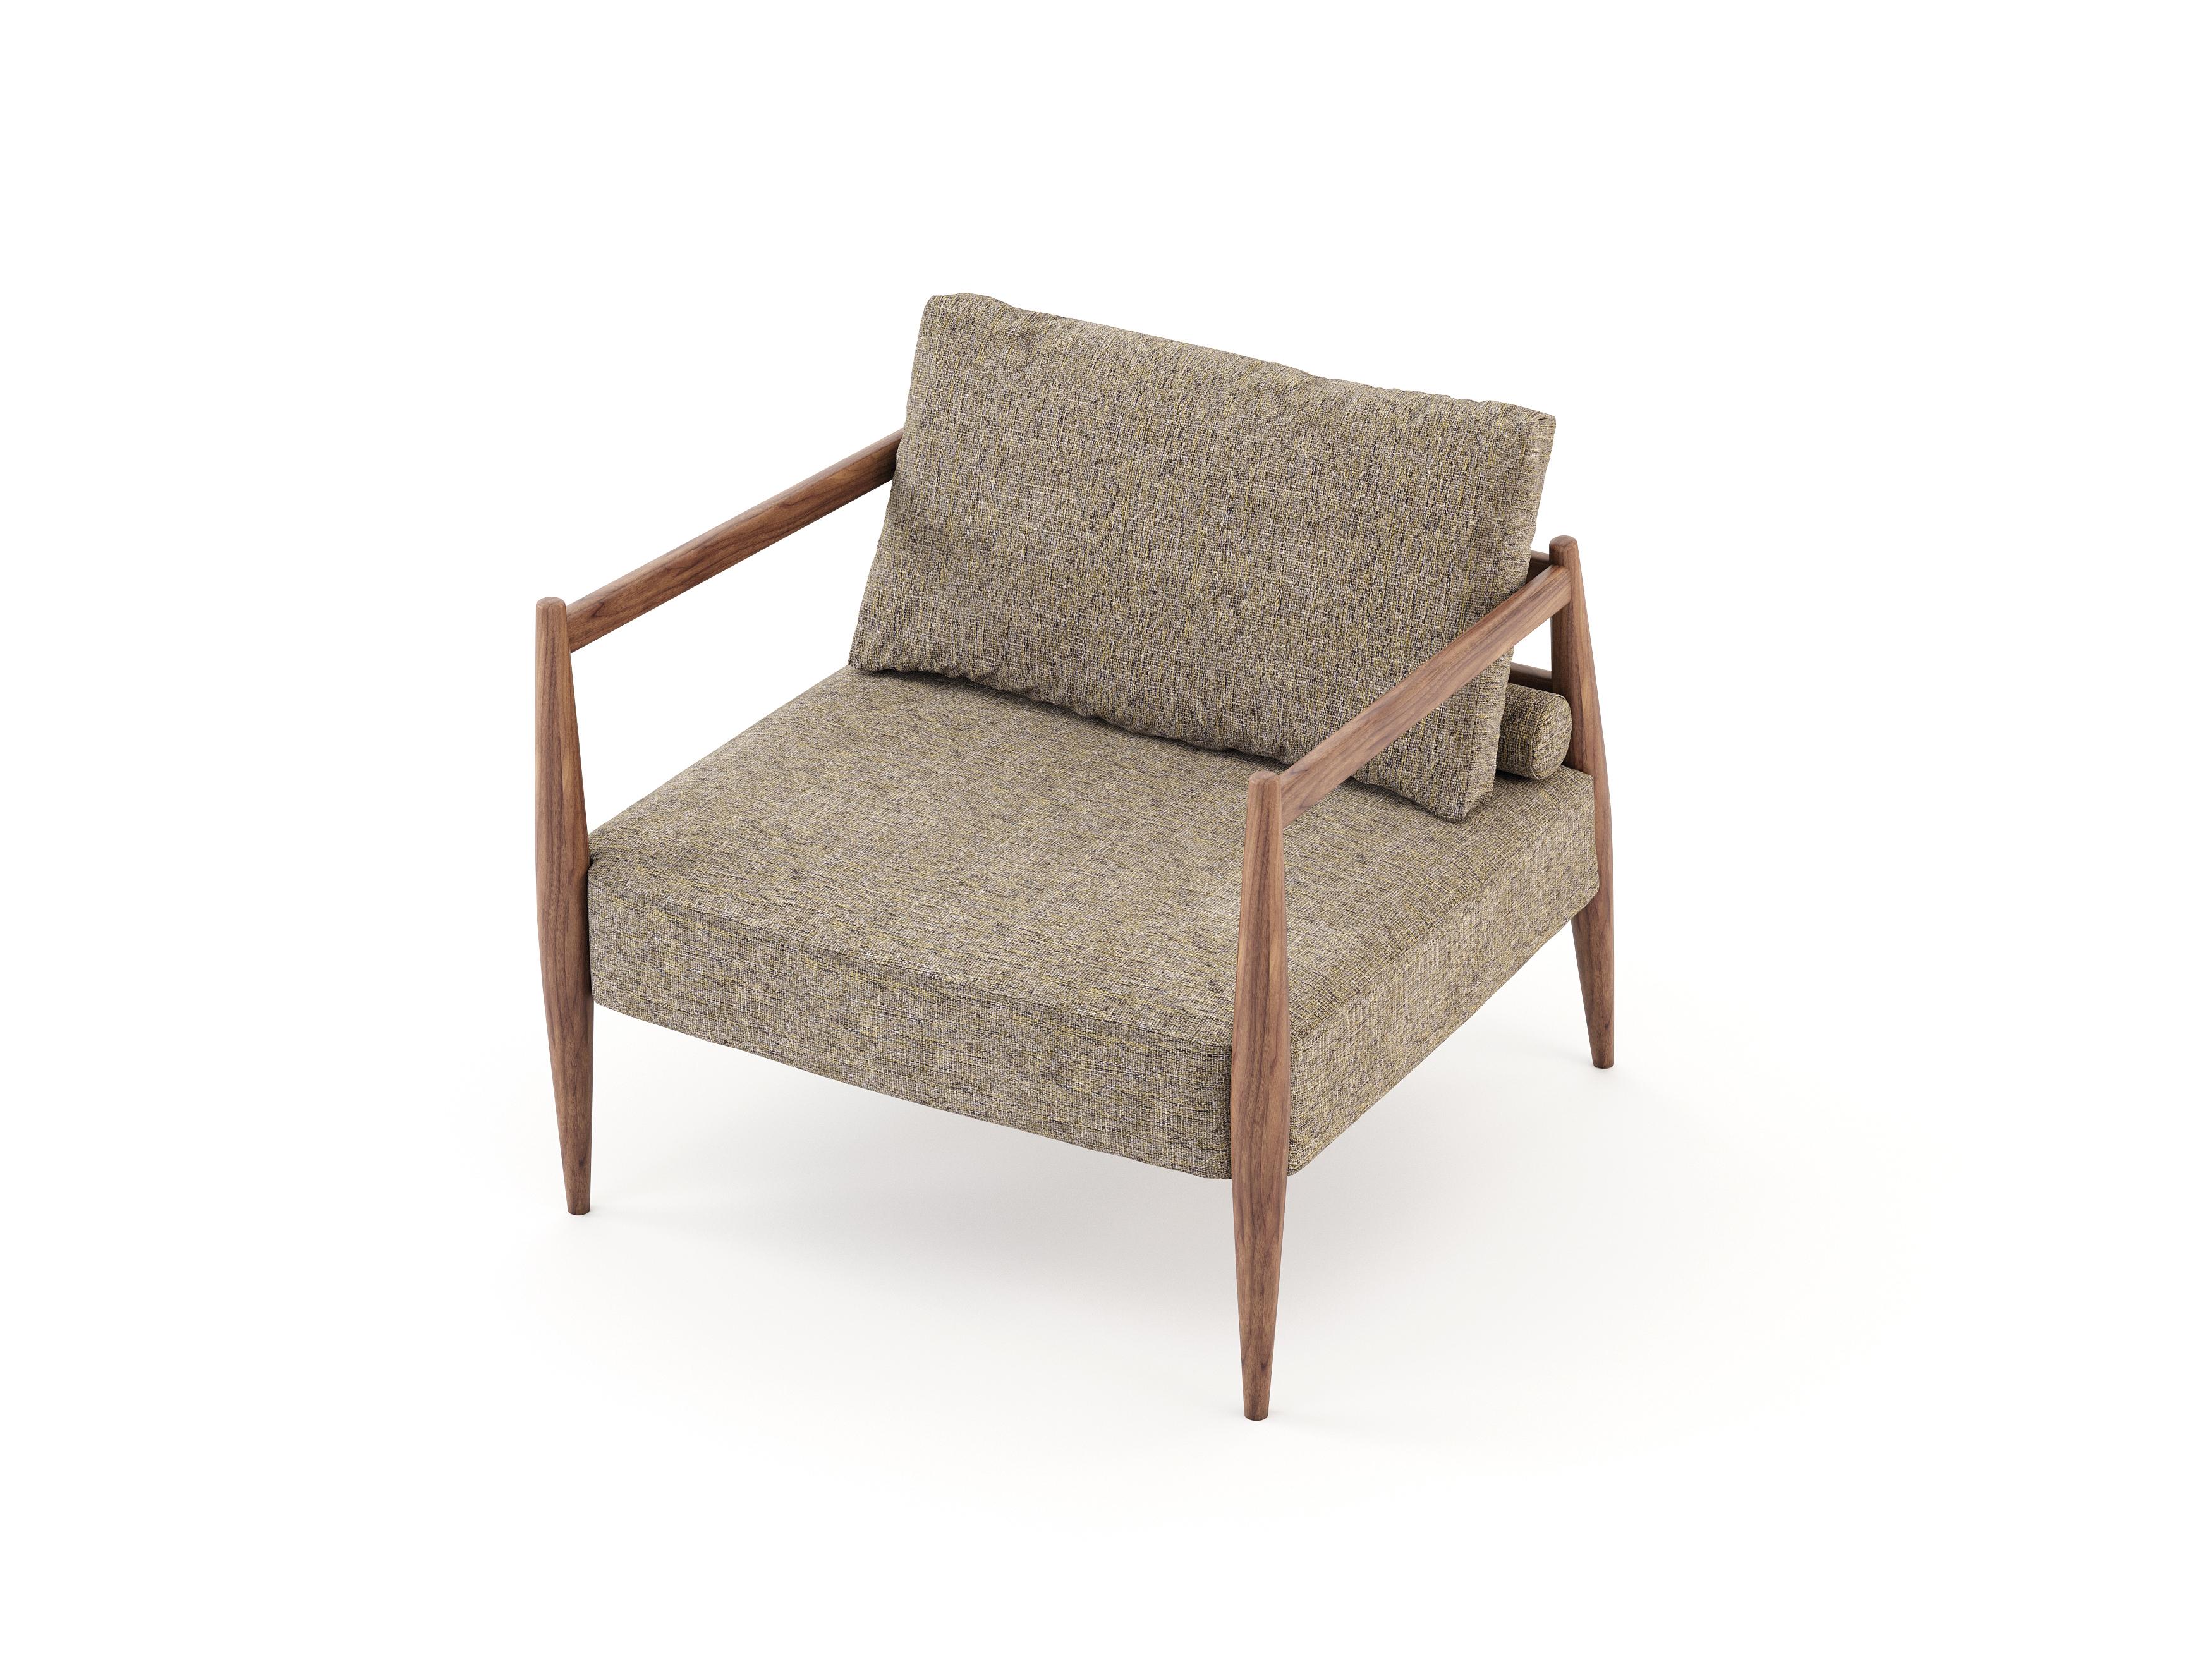 Portuguese Modern Miami Armchair Made with Walnut and Textile, Handmade by Stylish Club For Sale